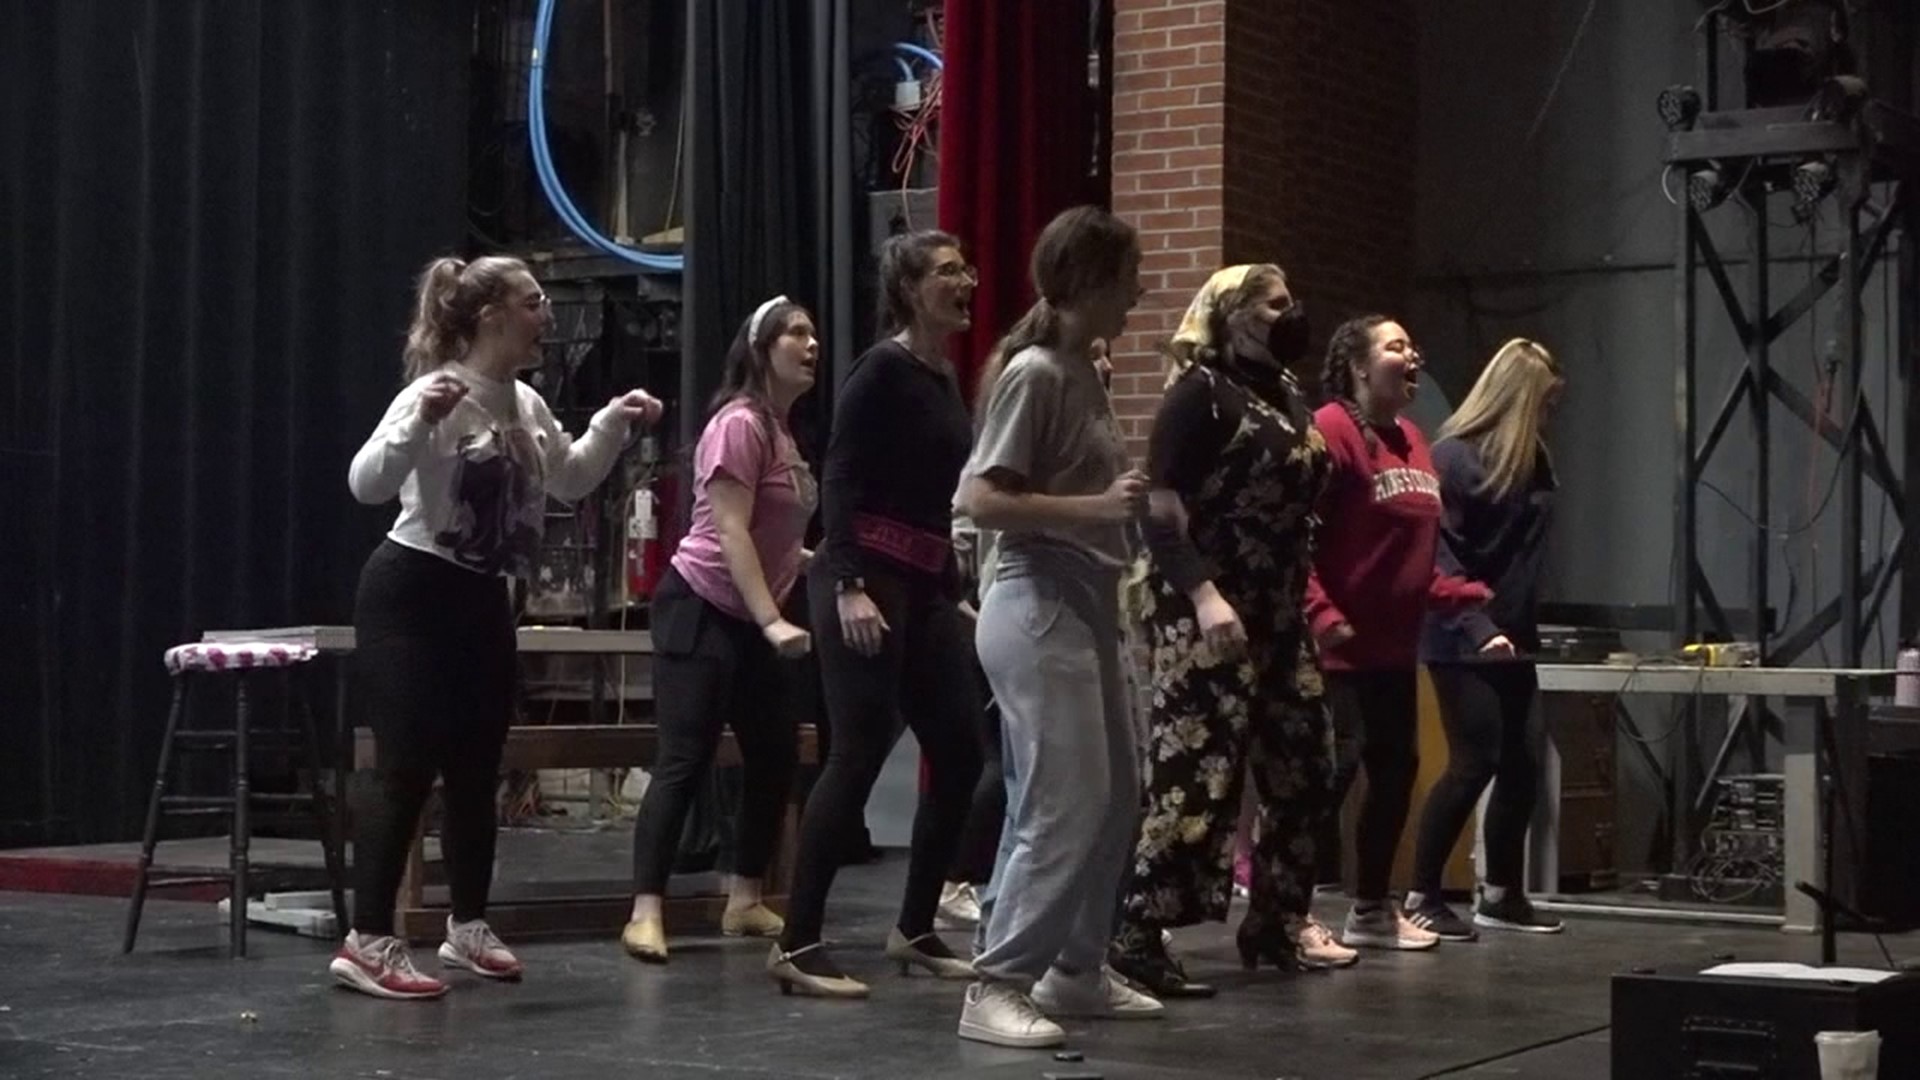 Newswatch 16's Chelsea Strub takes us backstage for this community theatre production.